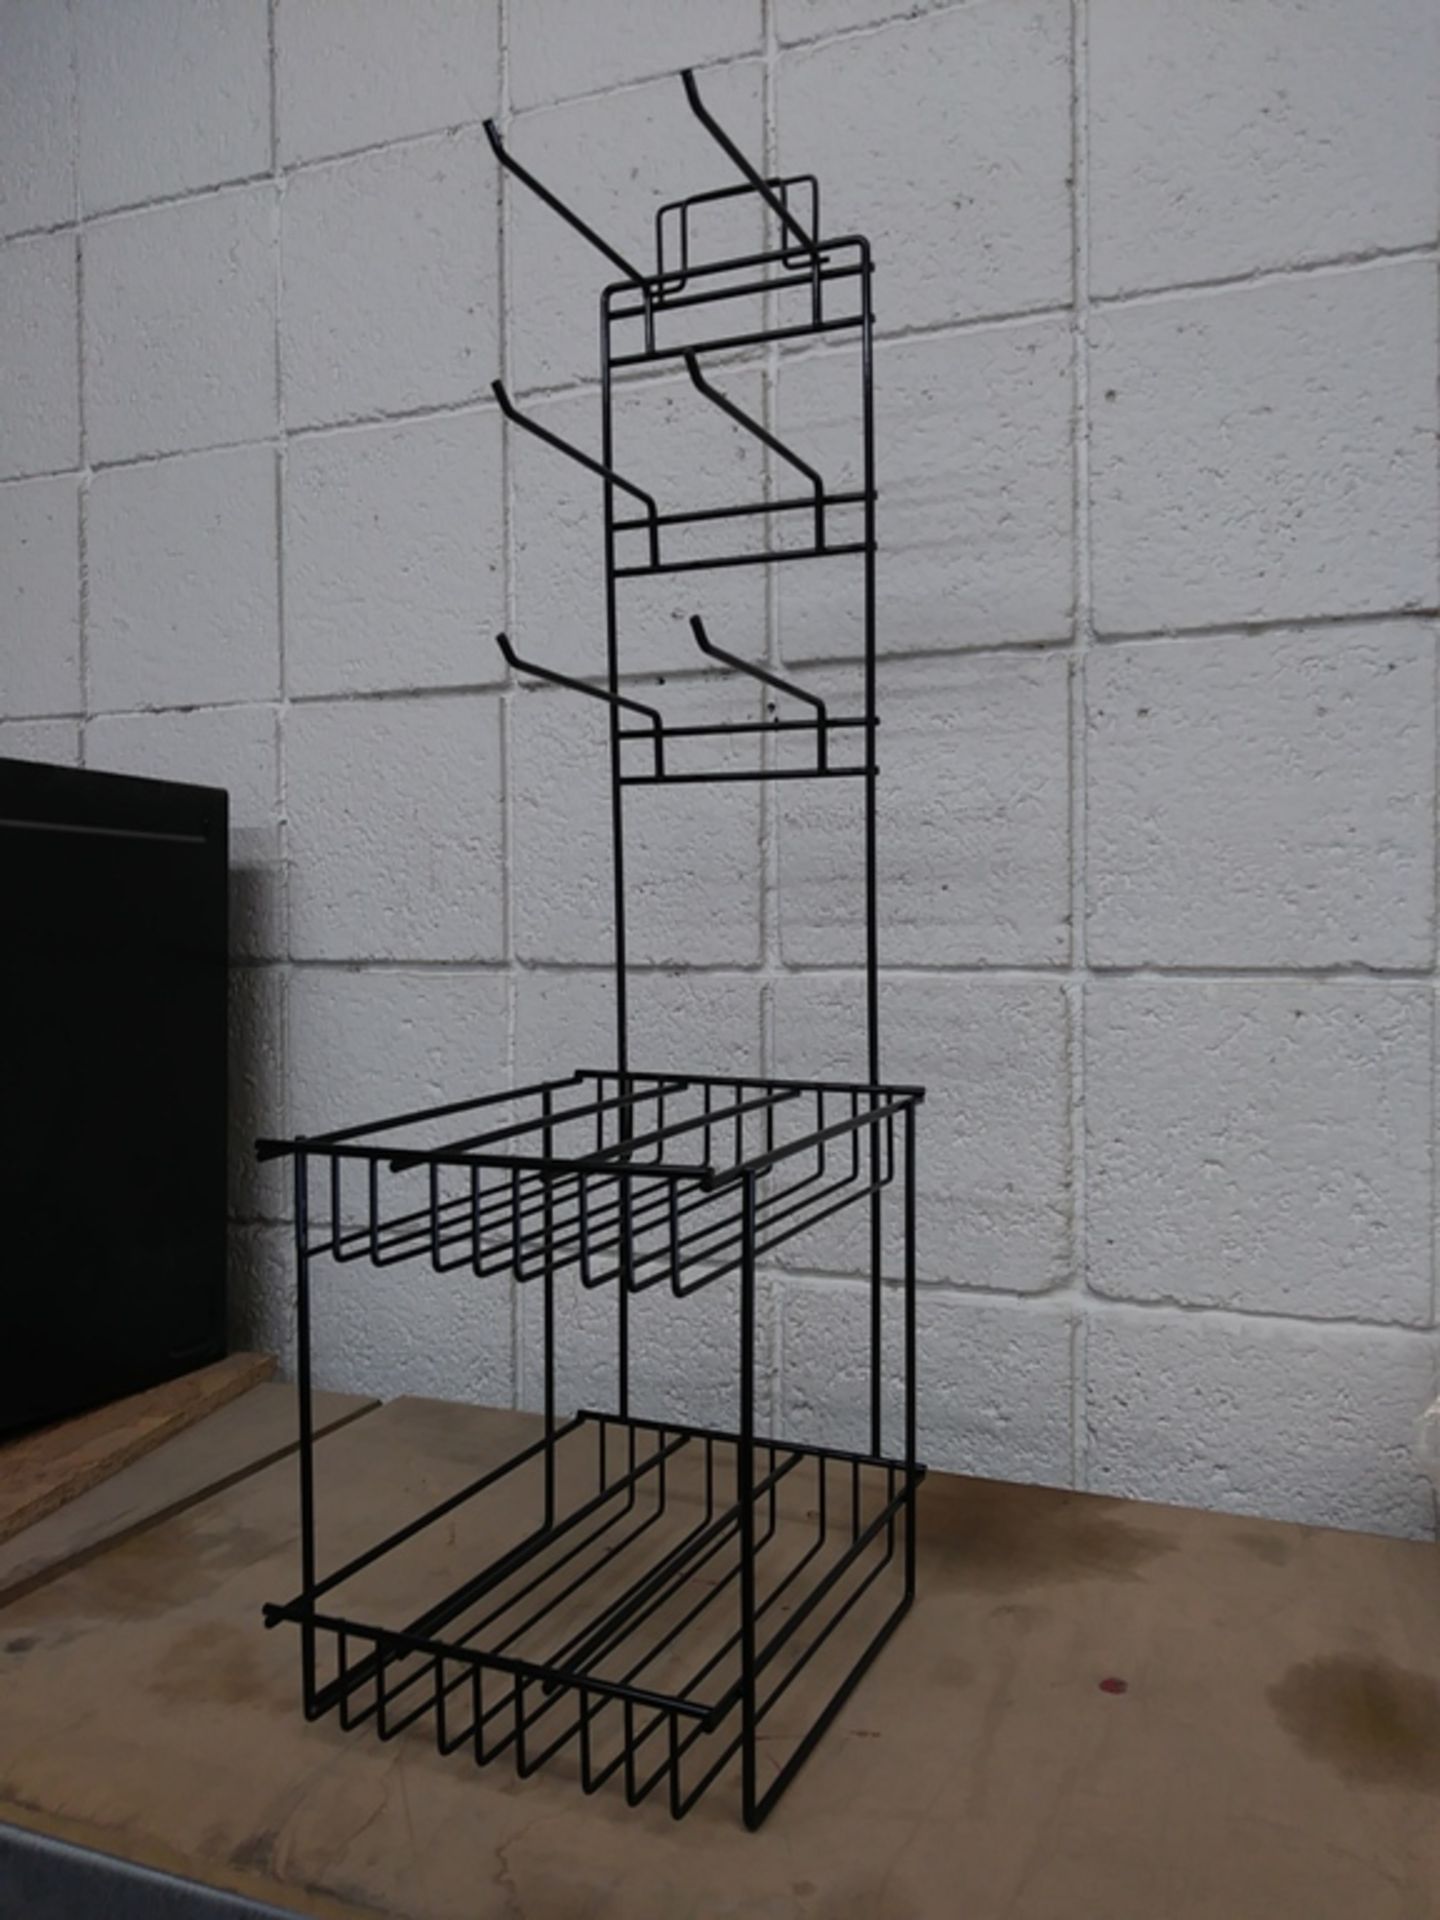 METAL PRODUCT DISPLAY RACKS (INCLUDES QTY: 30) - Image 2 of 7